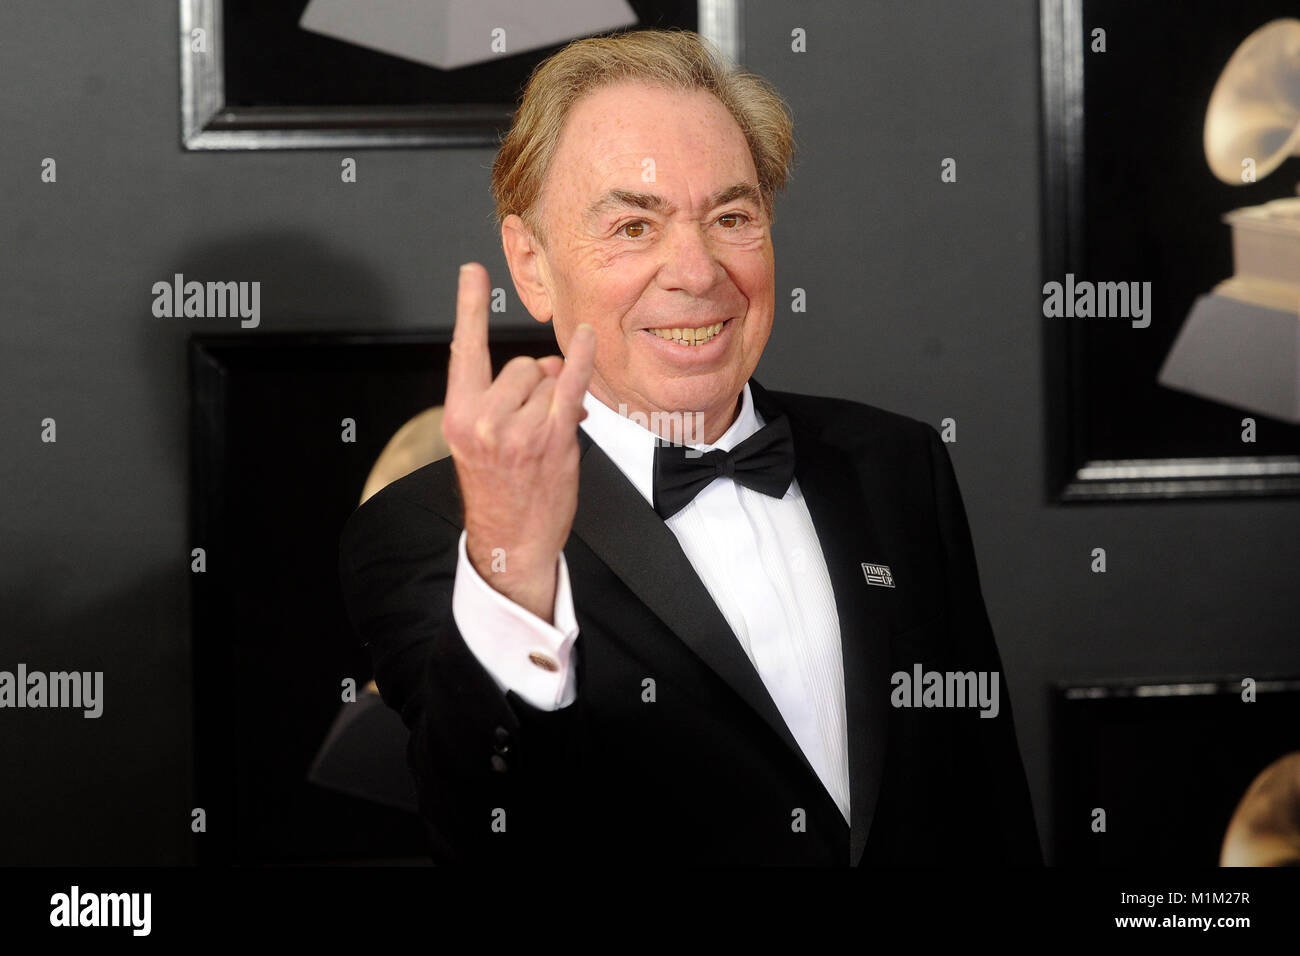 Andrew Lloyd Webber attends the 60th Annual Grammy Awards 2018 at Madison Square Garden on January 28, 2018 in New York City. Stock Photo